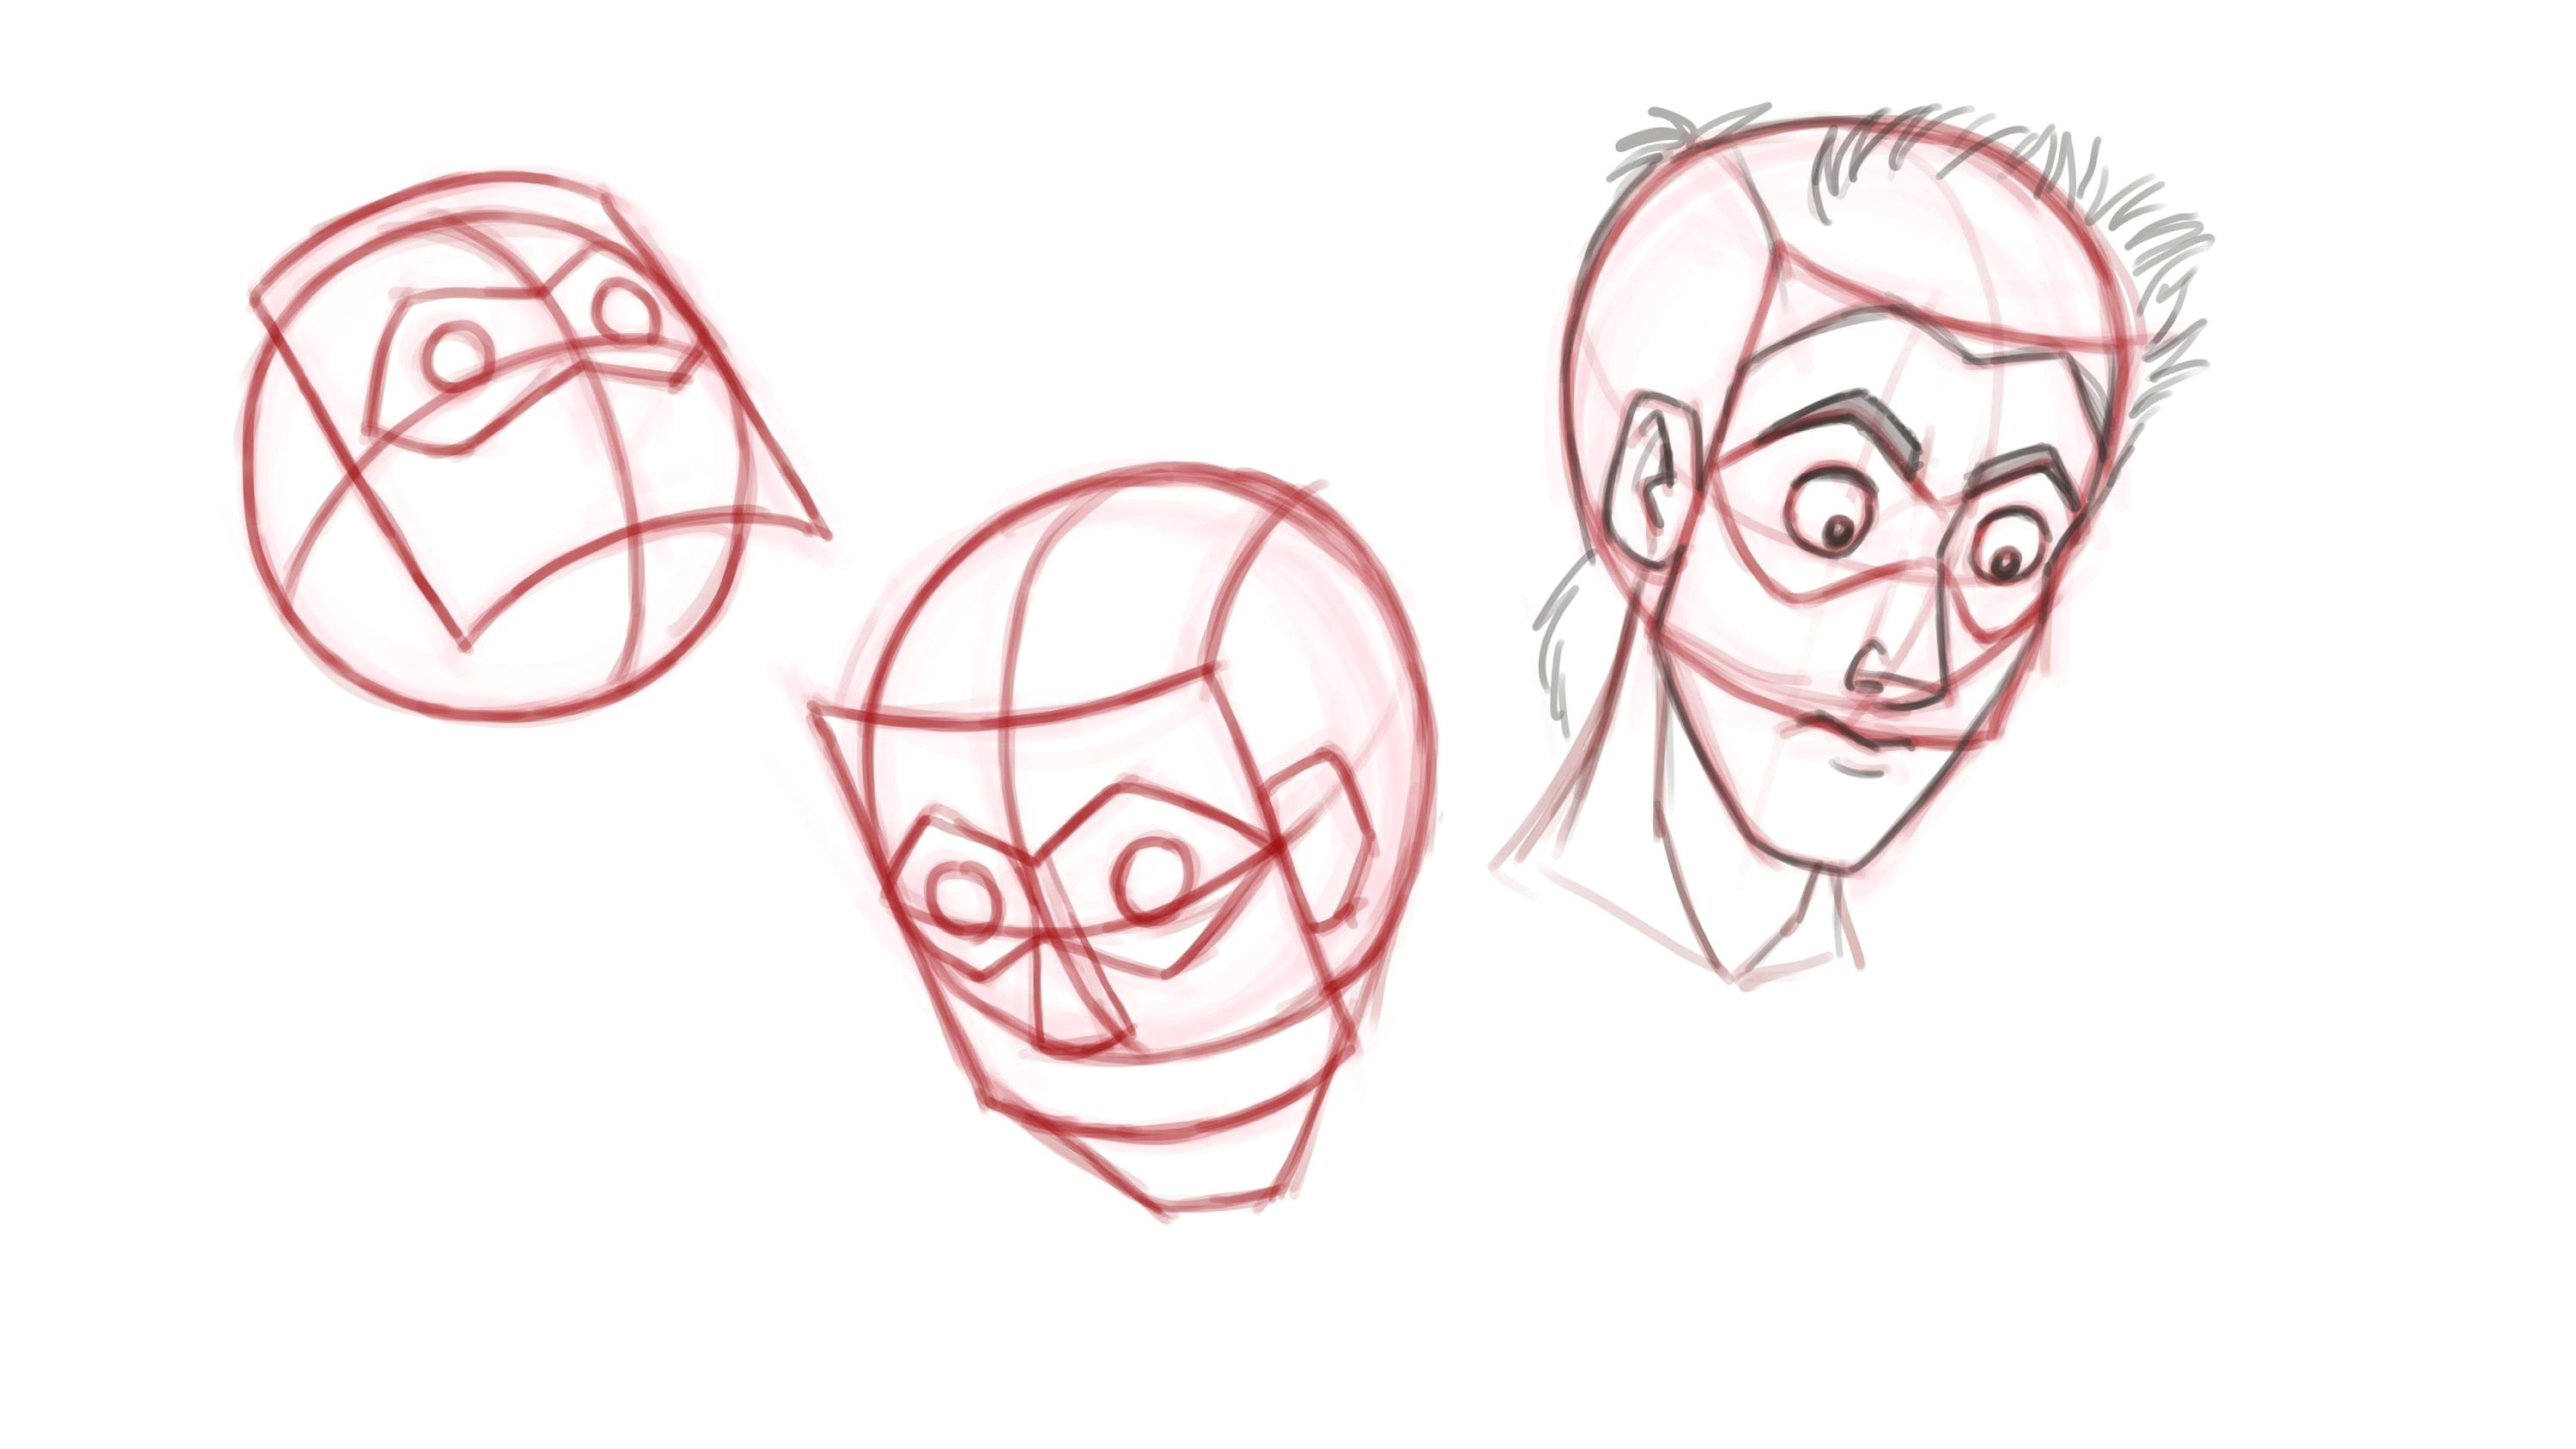 Drawing A Cartoon Head Drawn Animation Tutorial How to Animate Heads Drawing Faces From